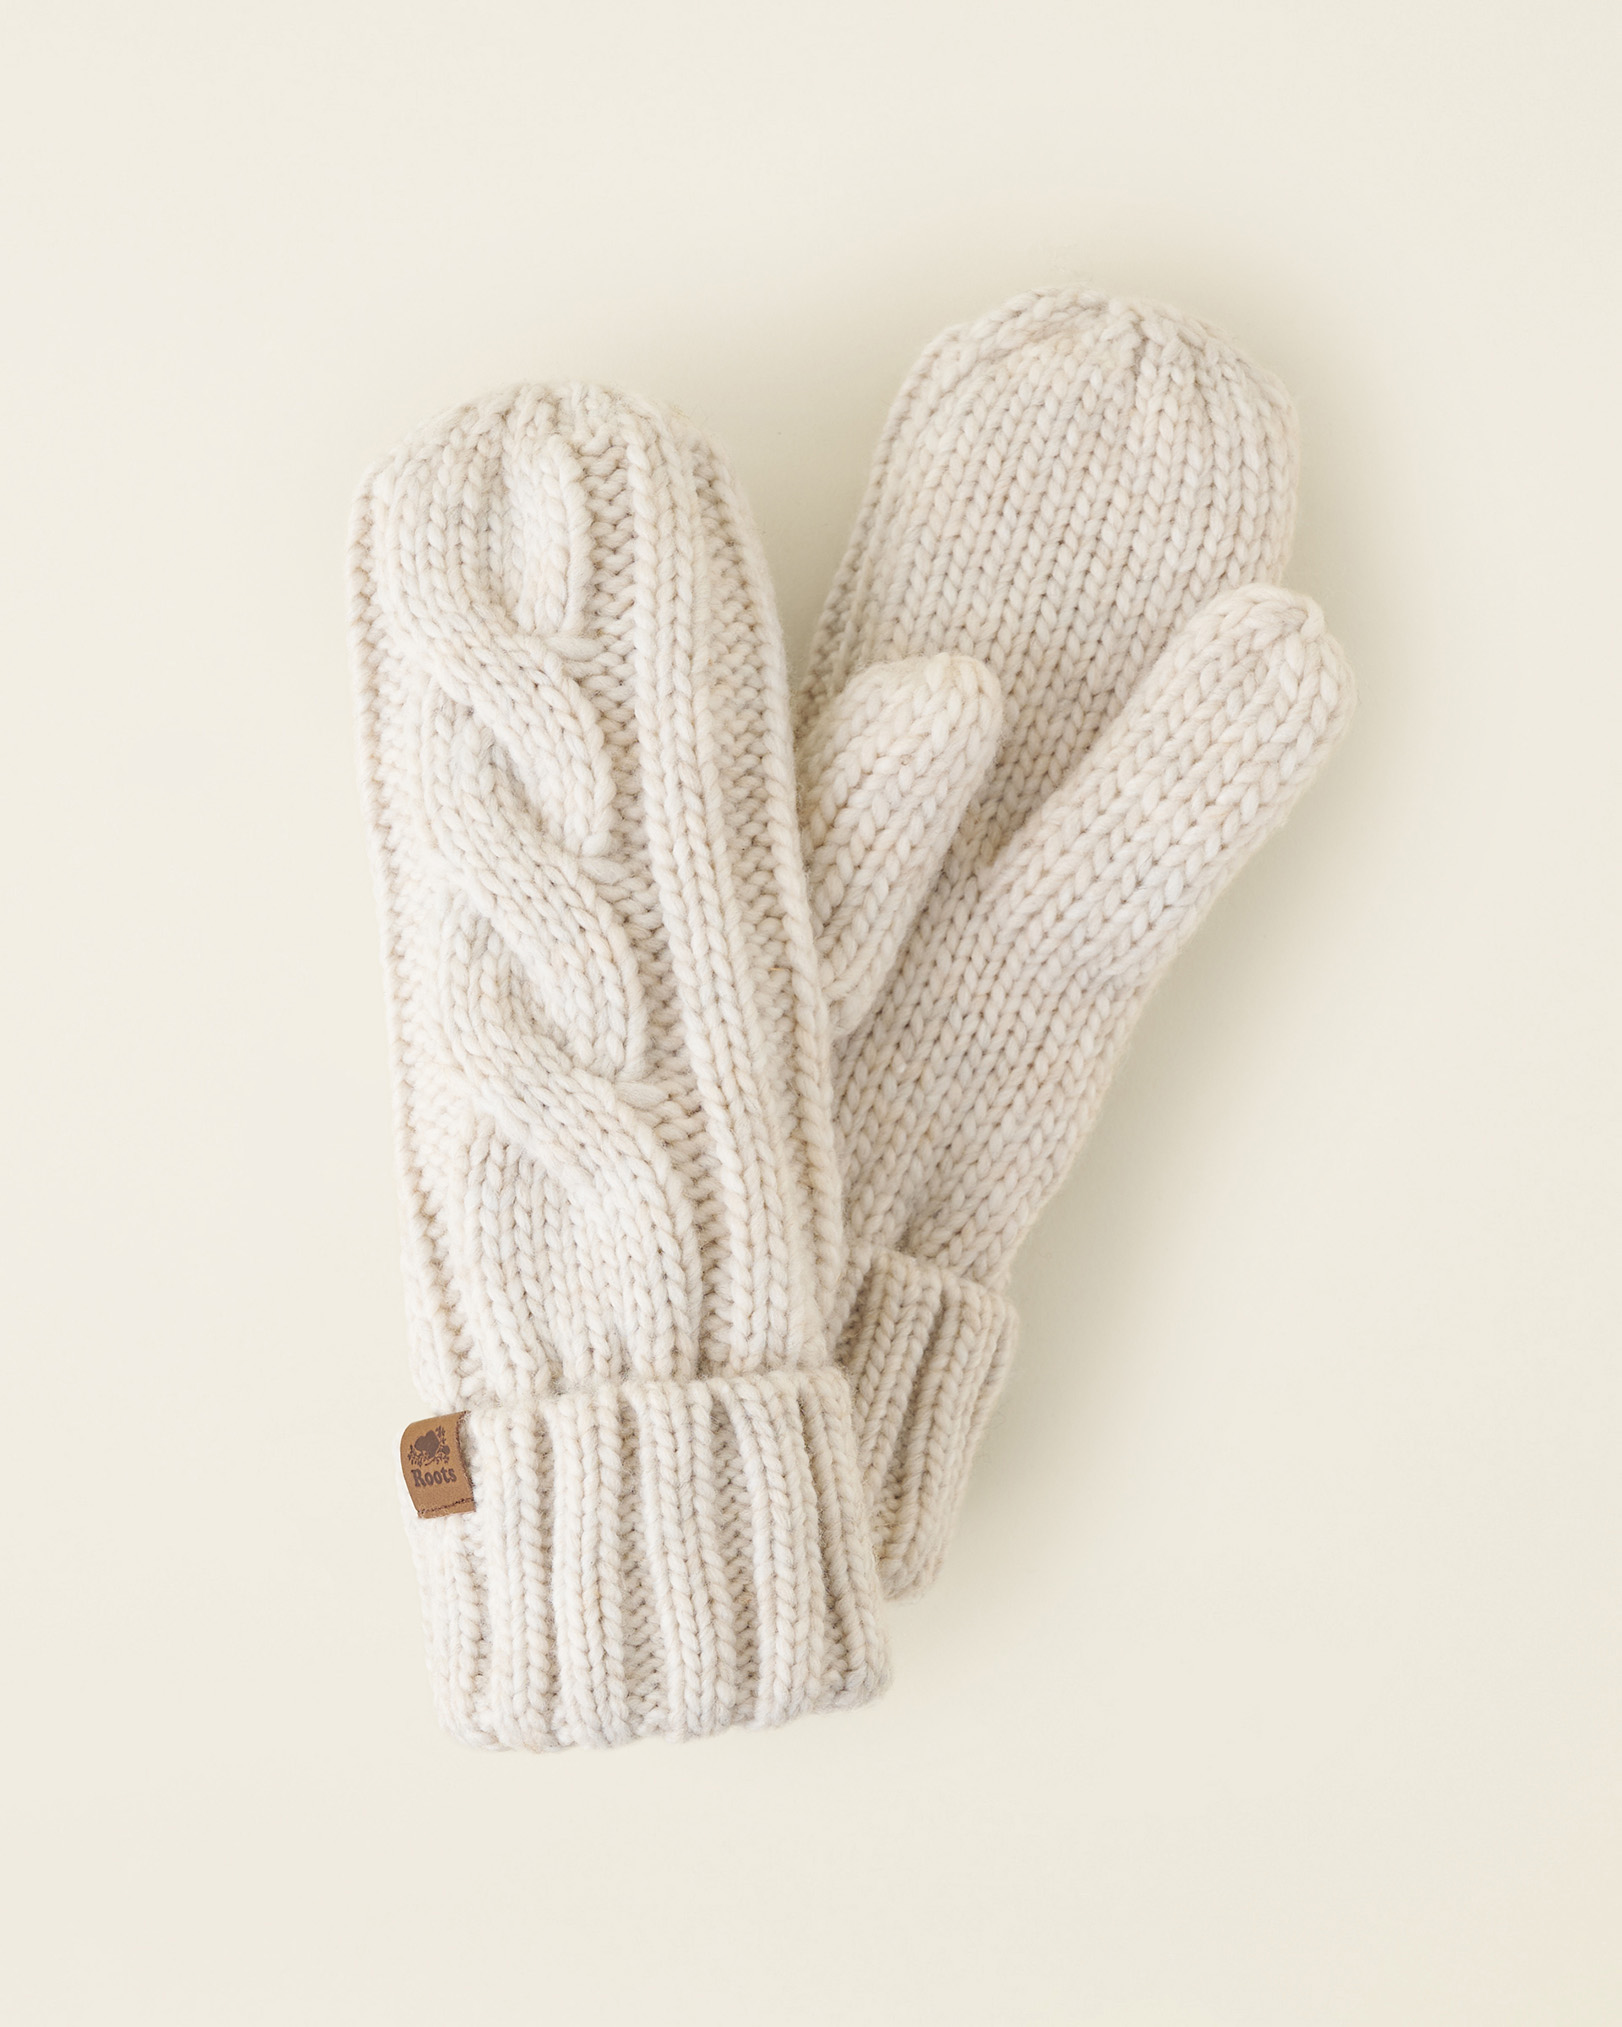 Roots Women's Olivia Cable Mitten in Oatmeal Mix